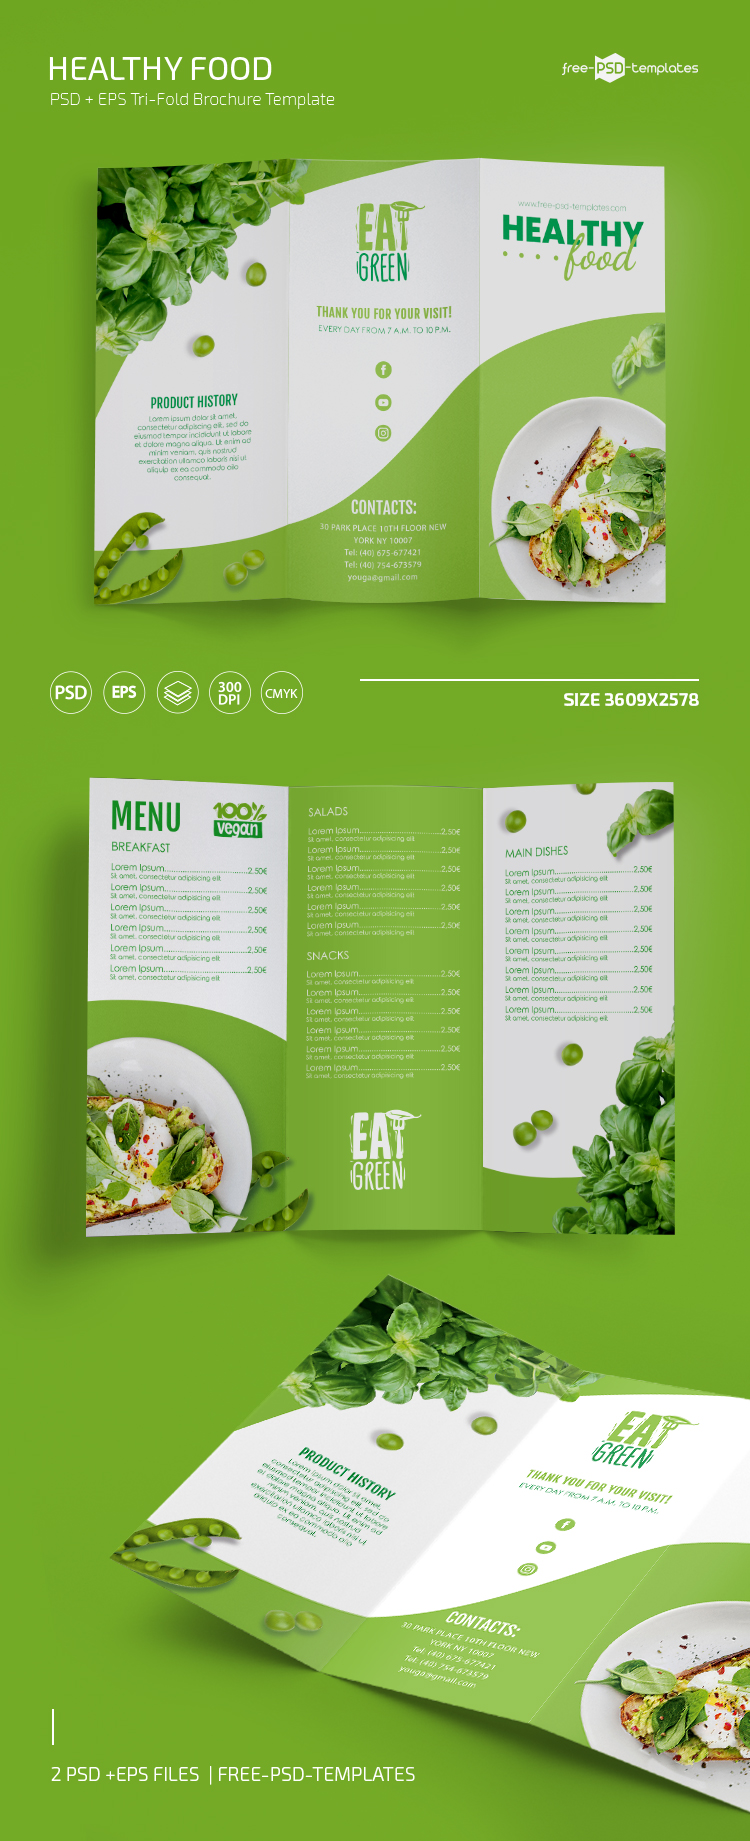 Healthy Food Tri-fold Brochure Template in PSD + EPS Free PSD Throughout Nutrition Brochure Template